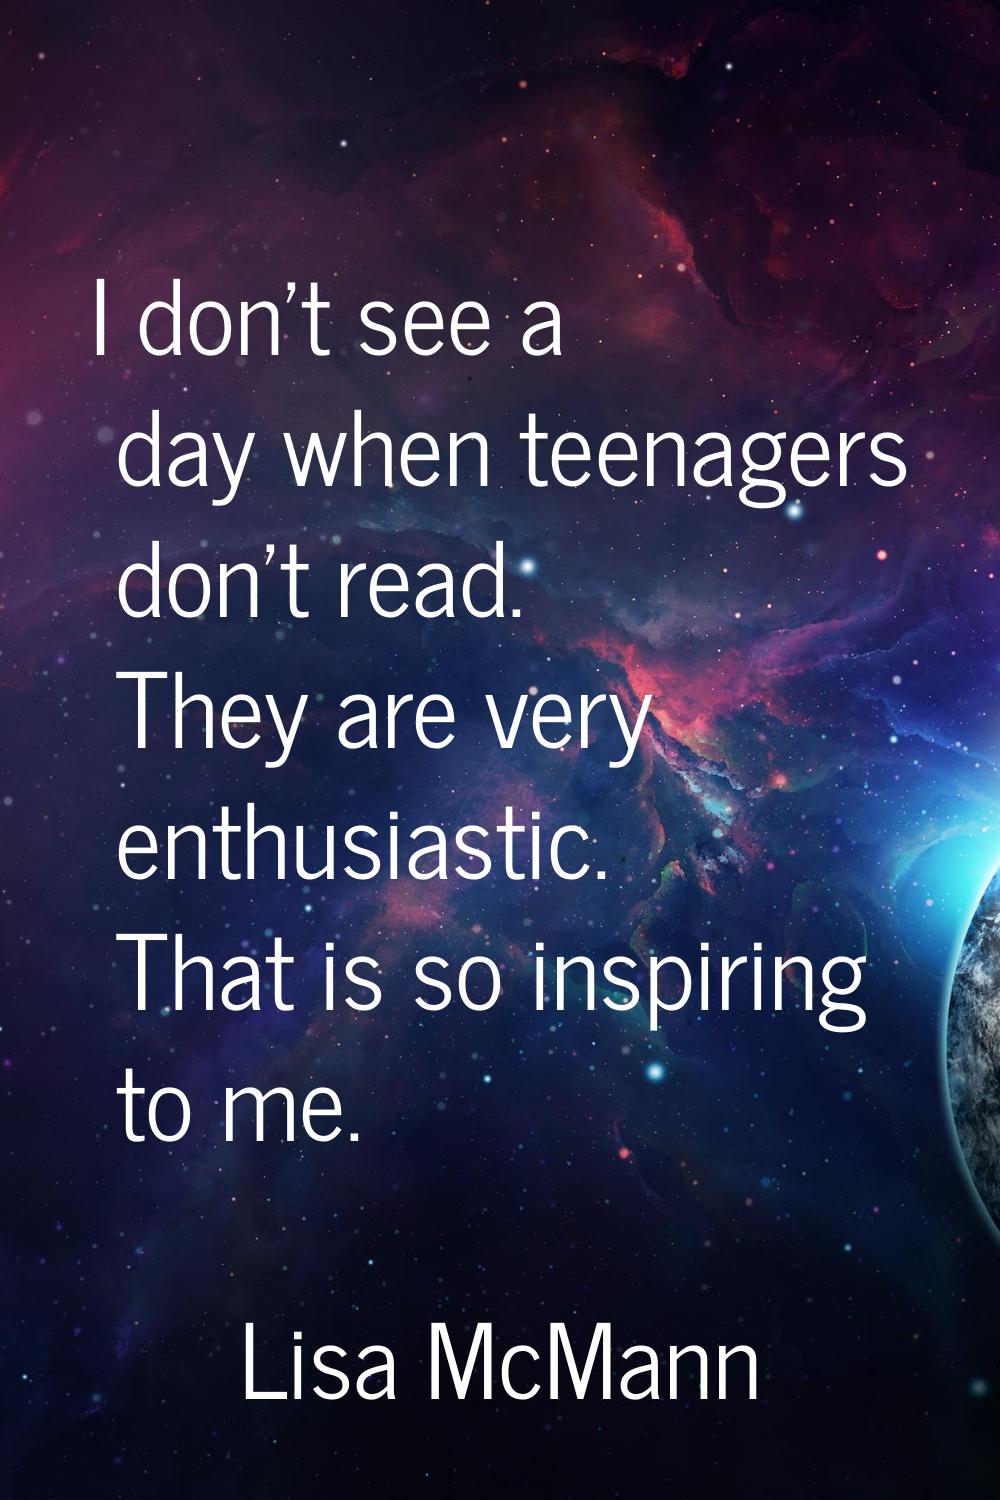 I don't see a day when teenagers don't read. They are very enthusiastic. That is so inspiring to me